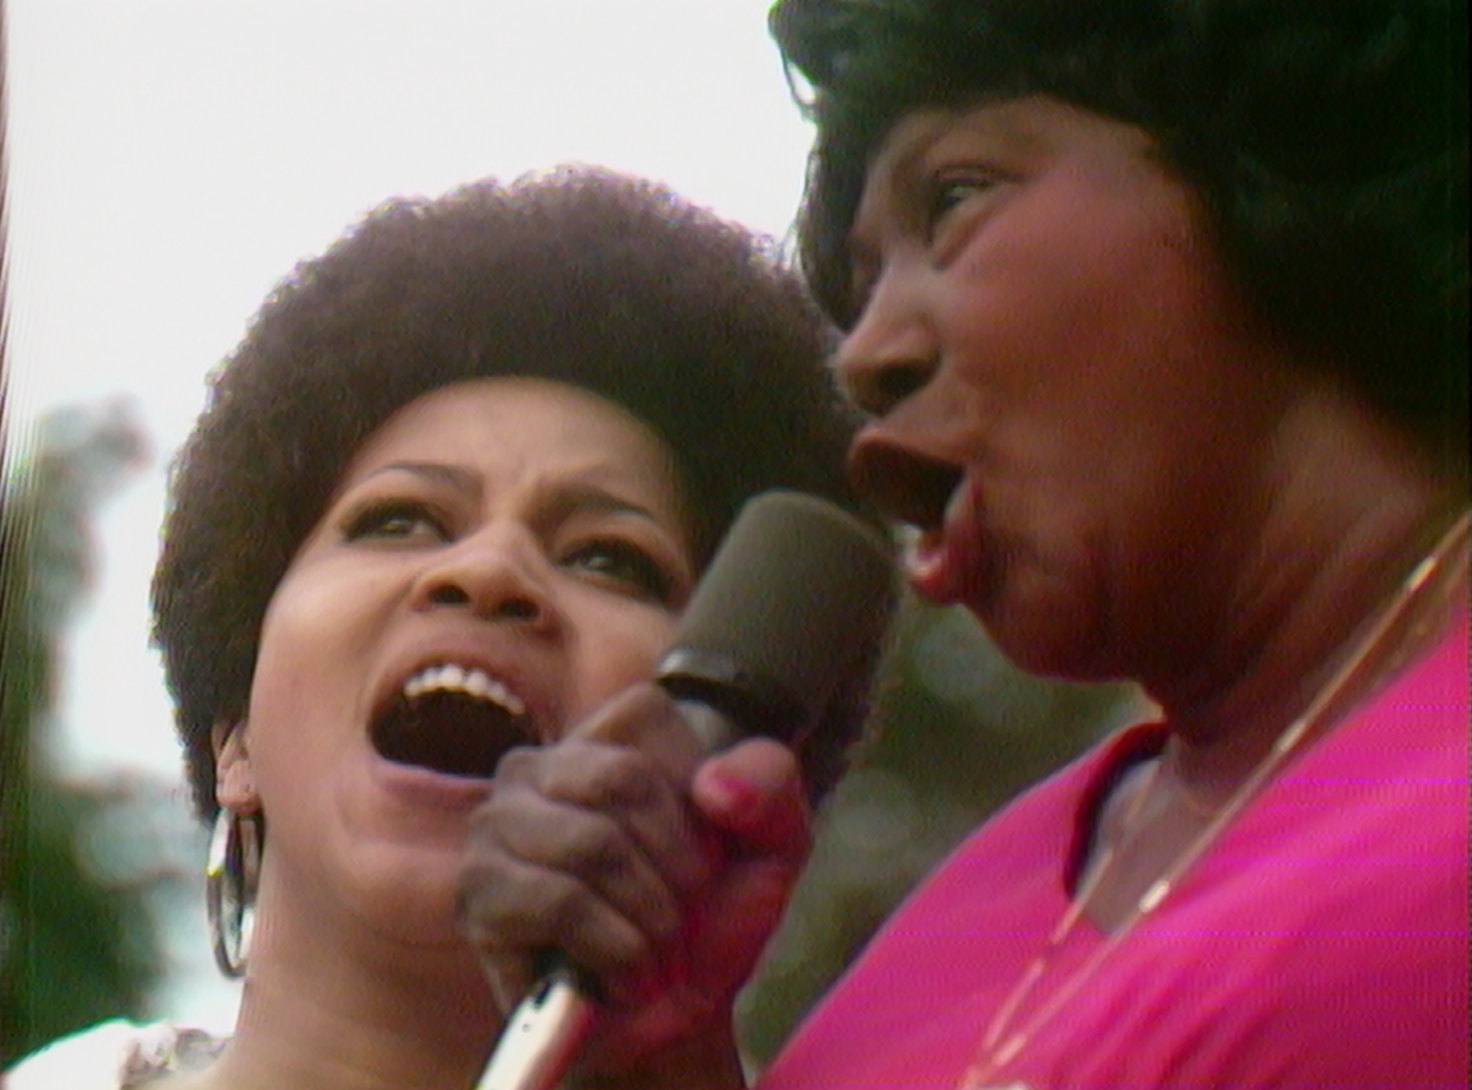 Still from the film "Summer of Soul" is a close-up image of two Black women singing into a microphone.